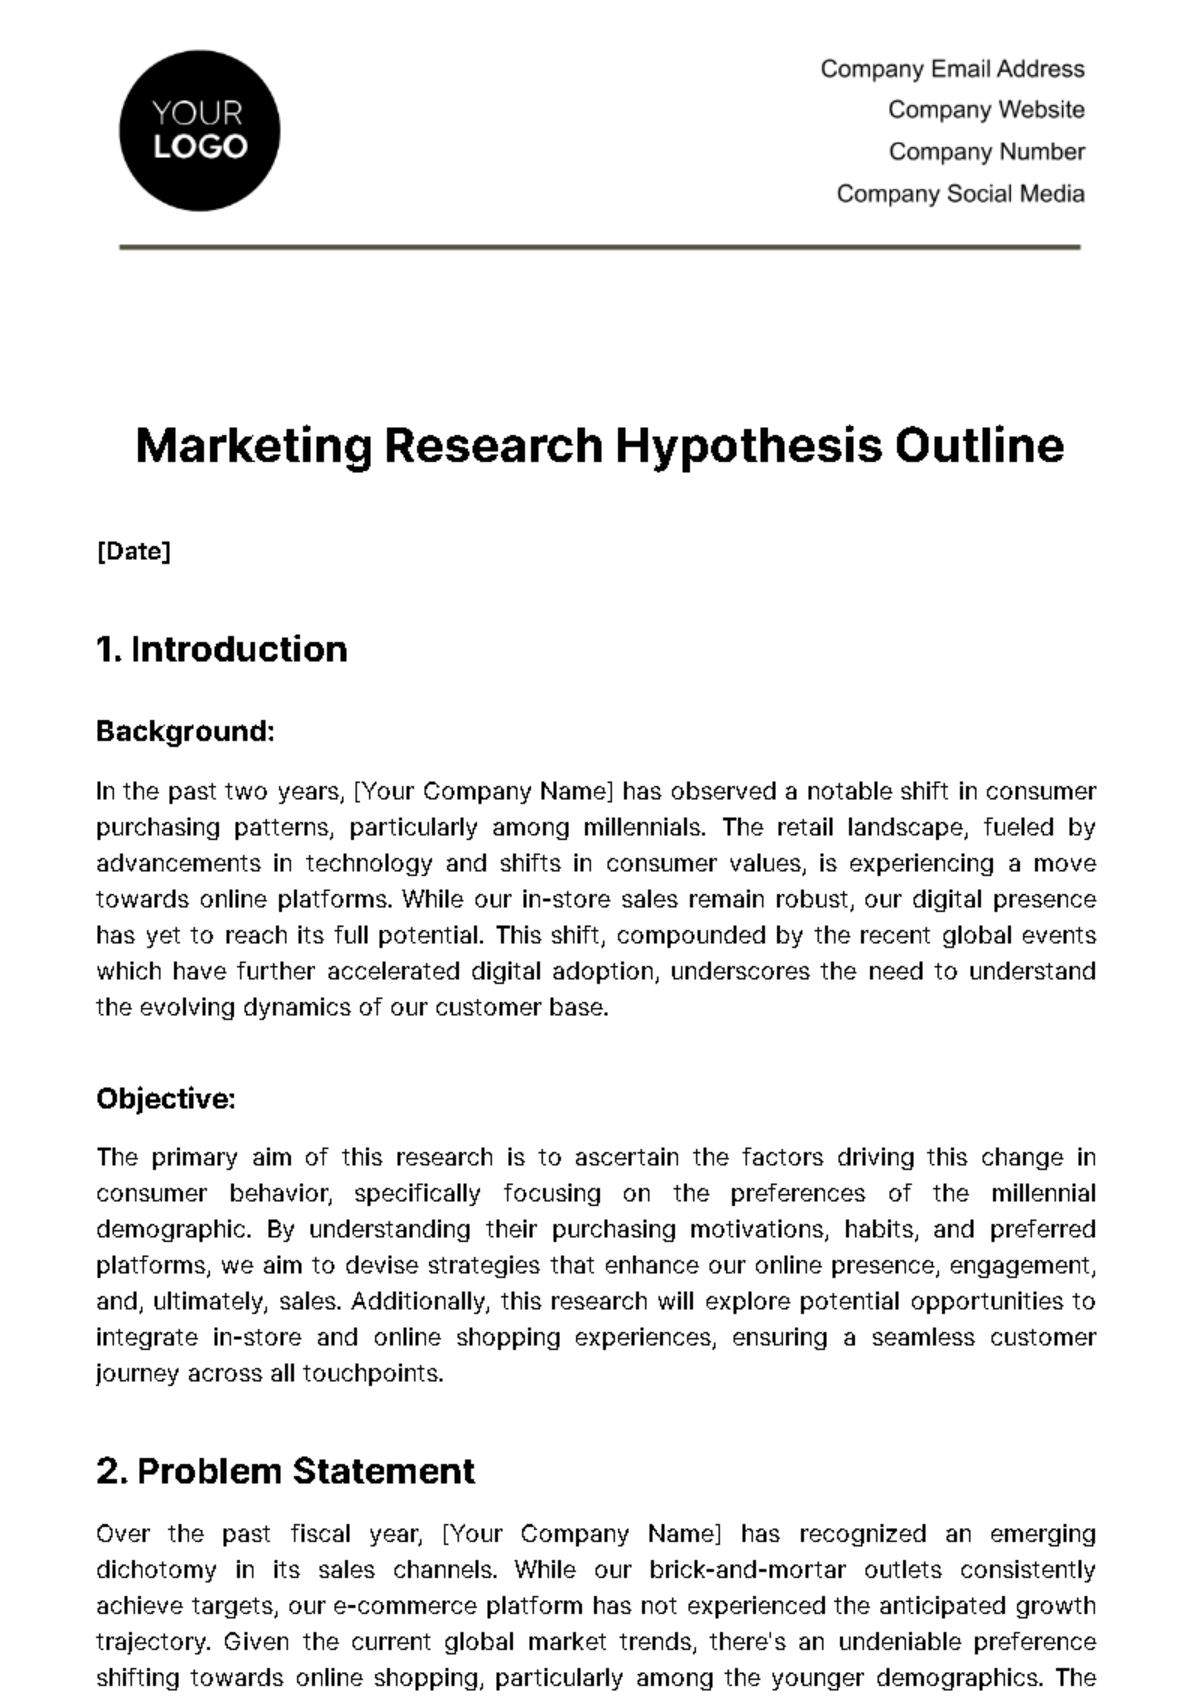 Marketing Research Hypothesis Outline Template